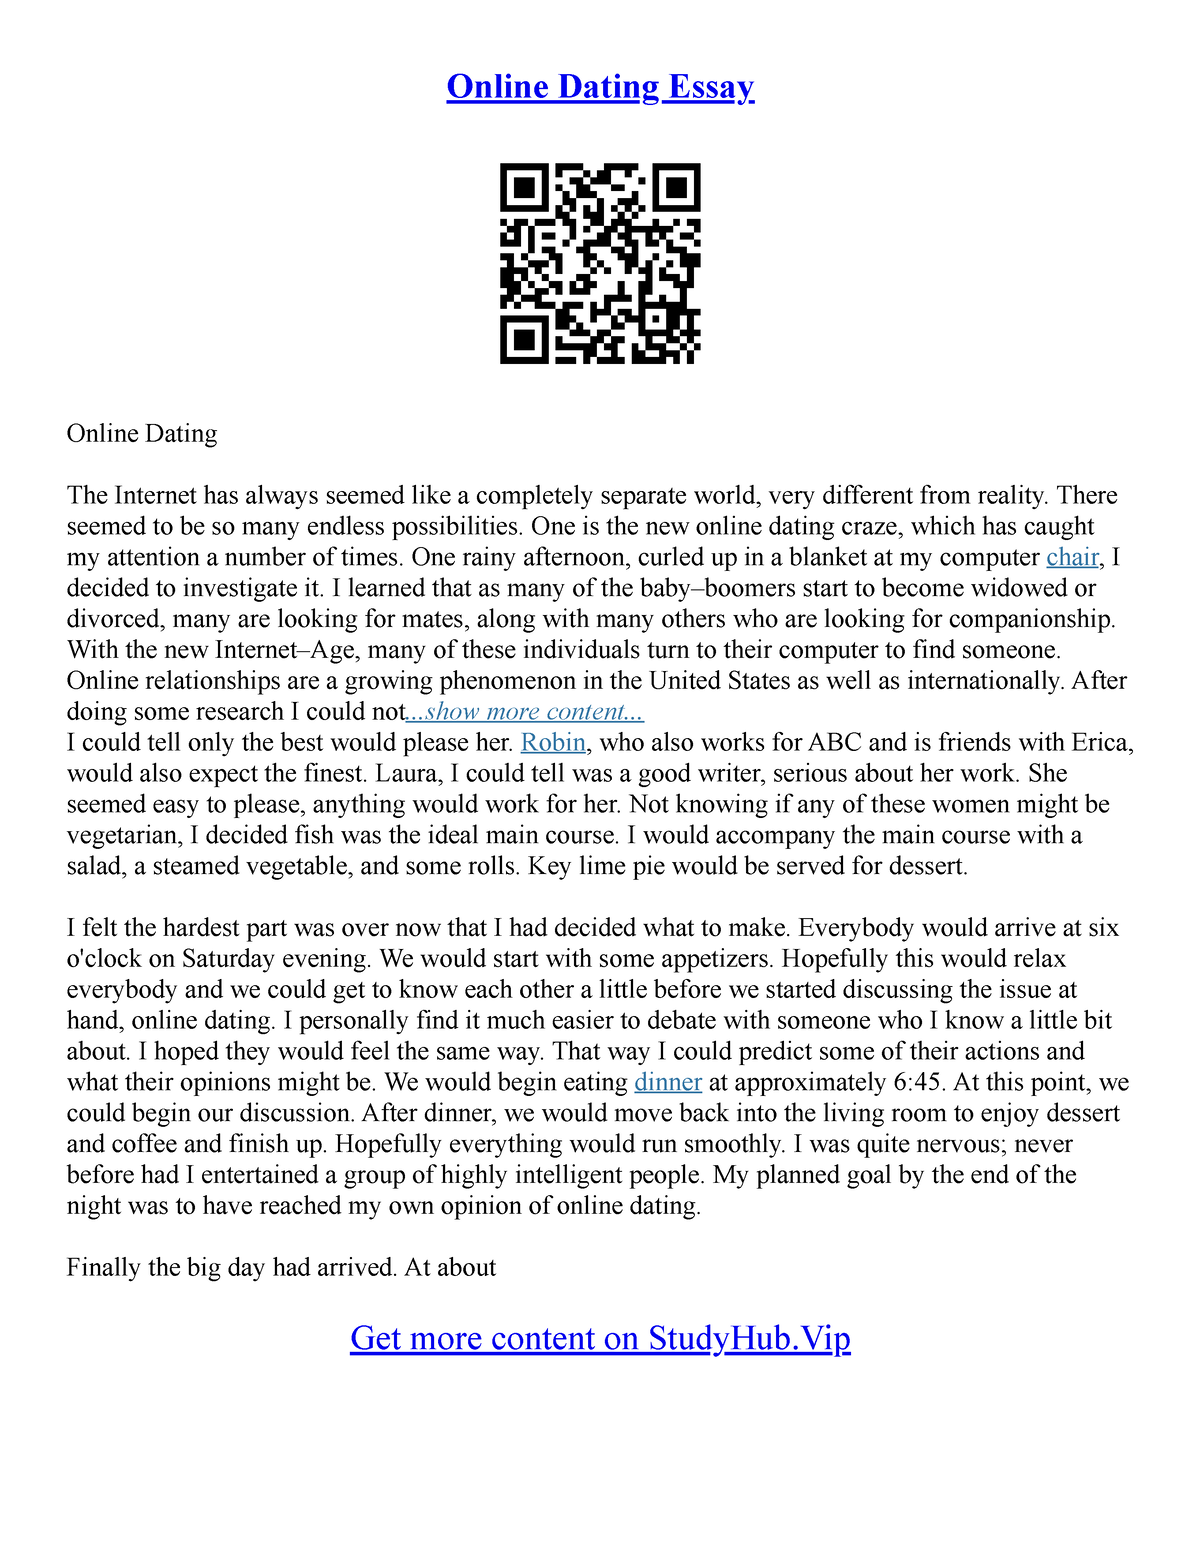 online dating essay examples